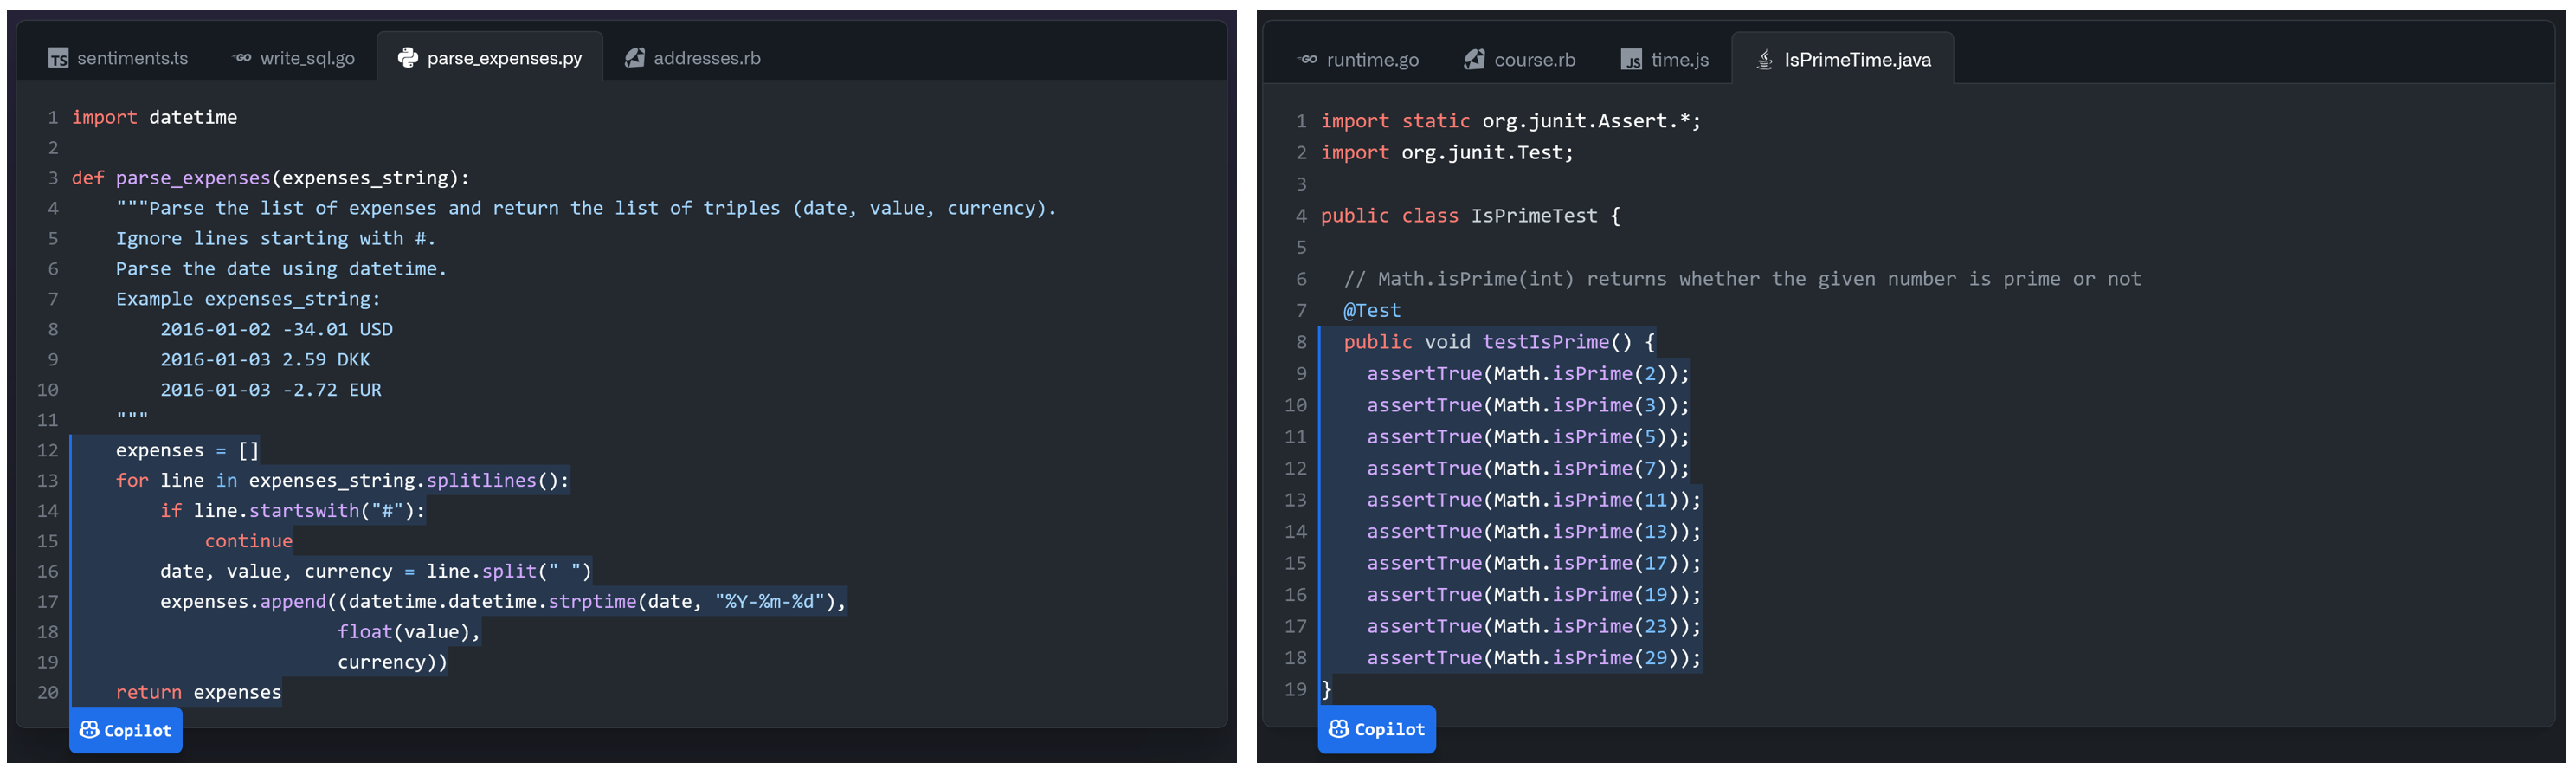 Code generation using the GitHub Copilot editor extension. The portion highlighted in blue has been generated by the model. Left: a function body, generated based on a textual description in a comment. Right: a set of generated test cases. Source: copilot.github.com